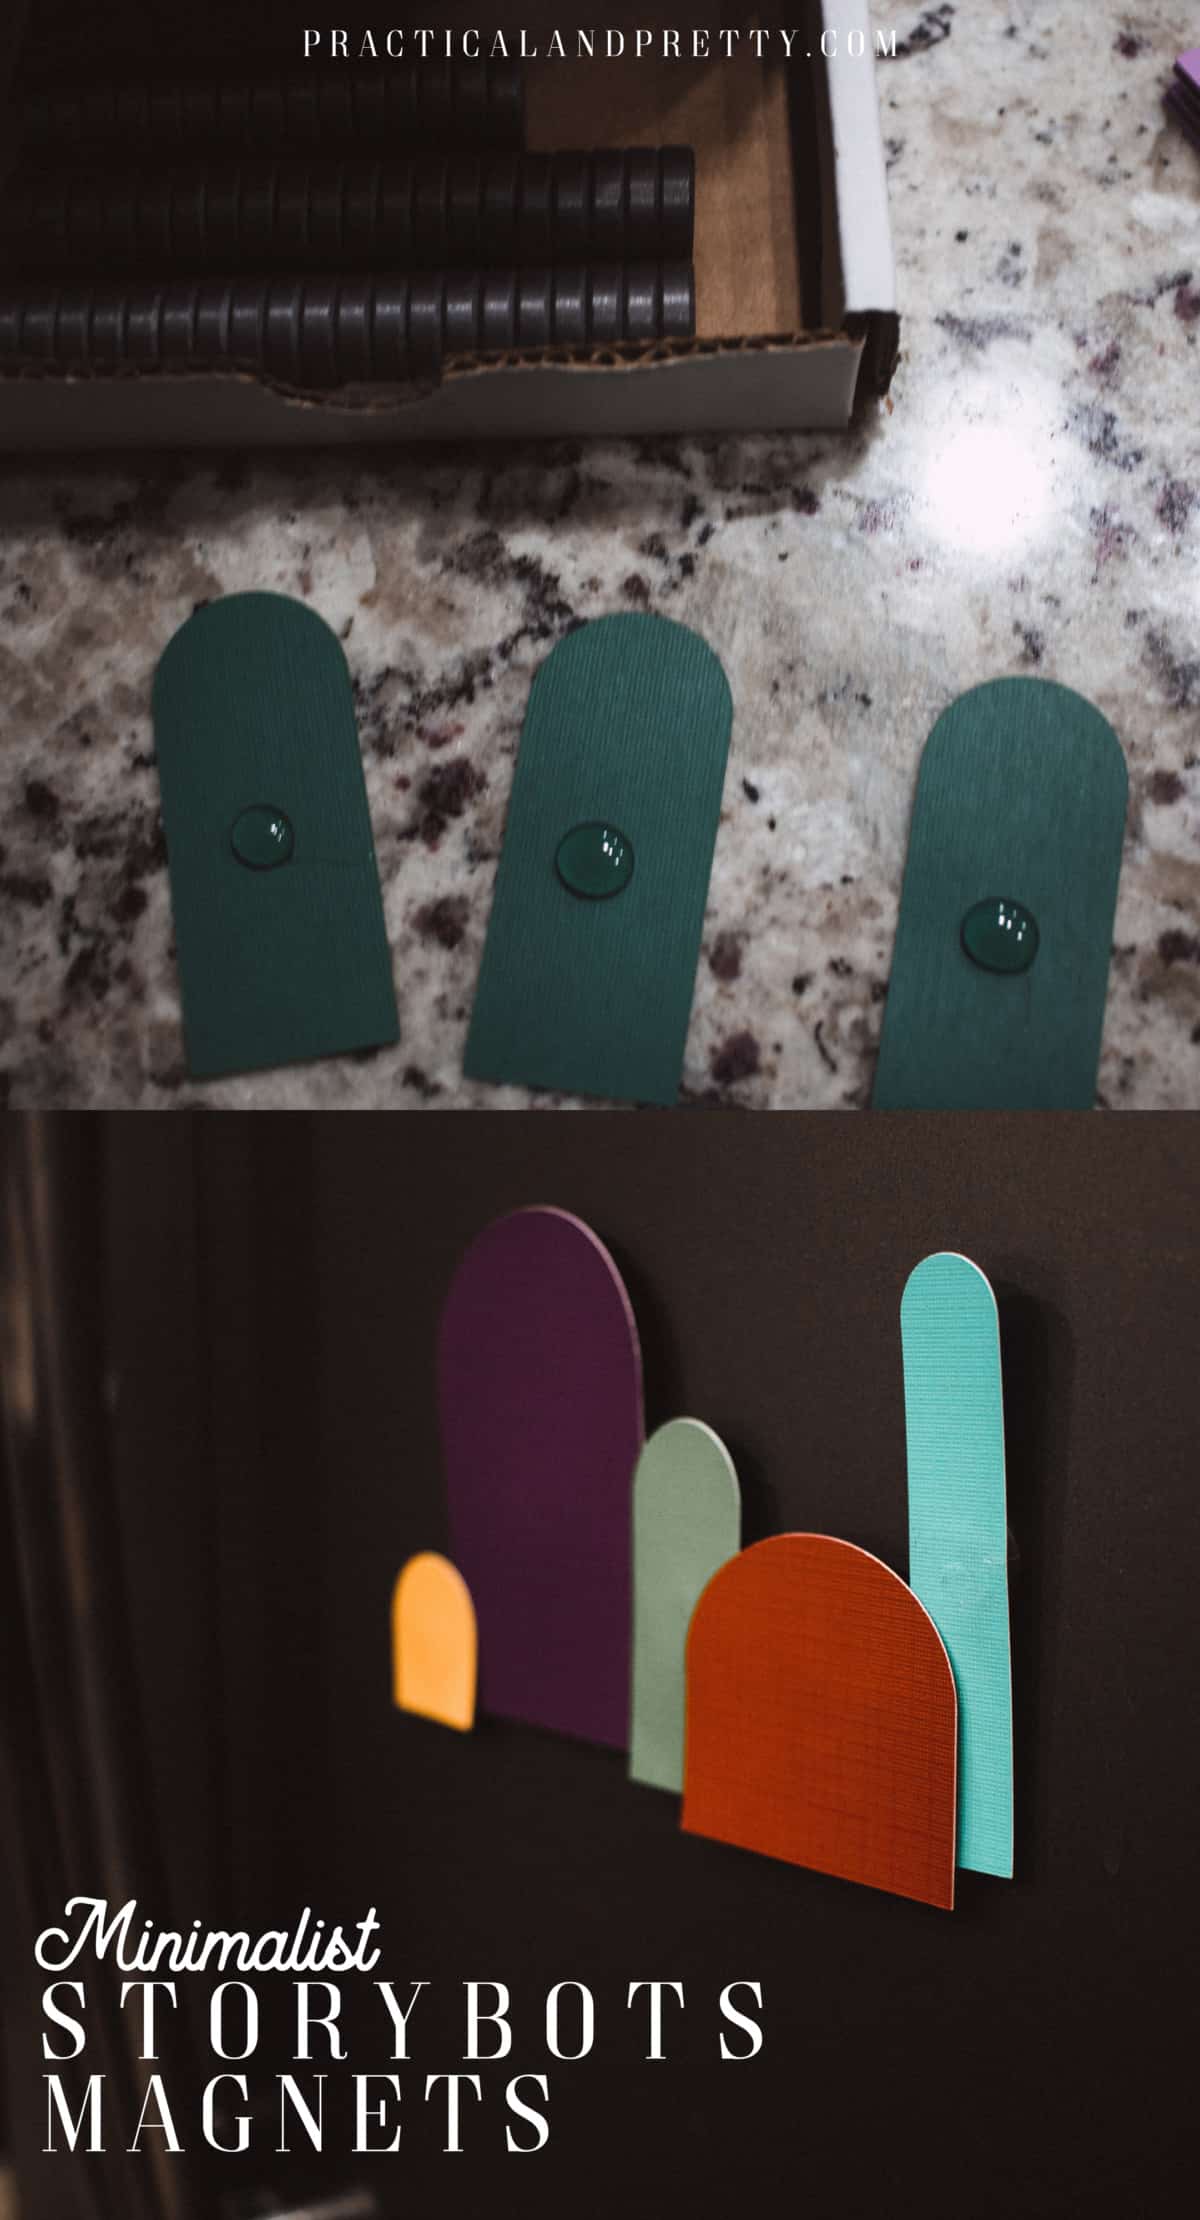 These magnets are a simple look at some of your favorite robots. My toddler loves playing with them and they were perfect for a little party favor.